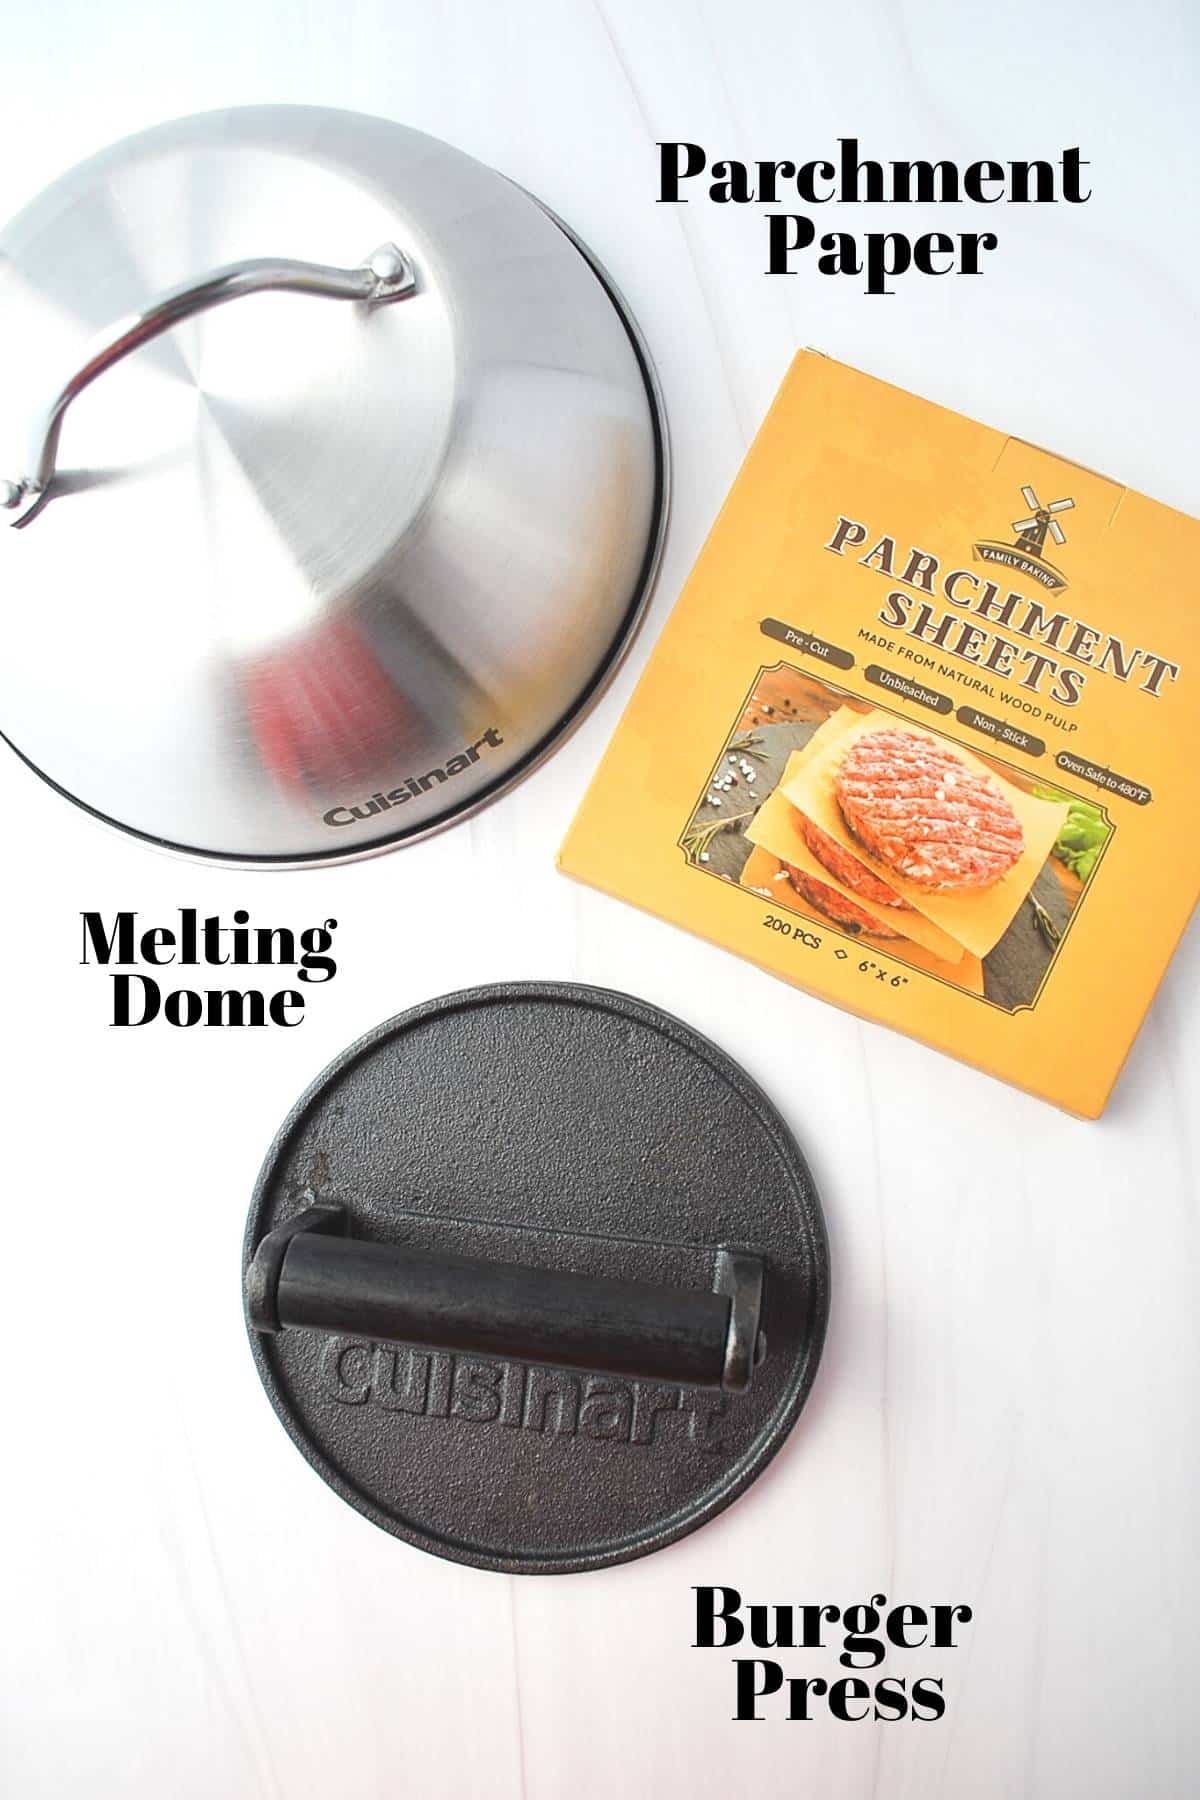 melting dome, burger press, and parchment sheets on a counter